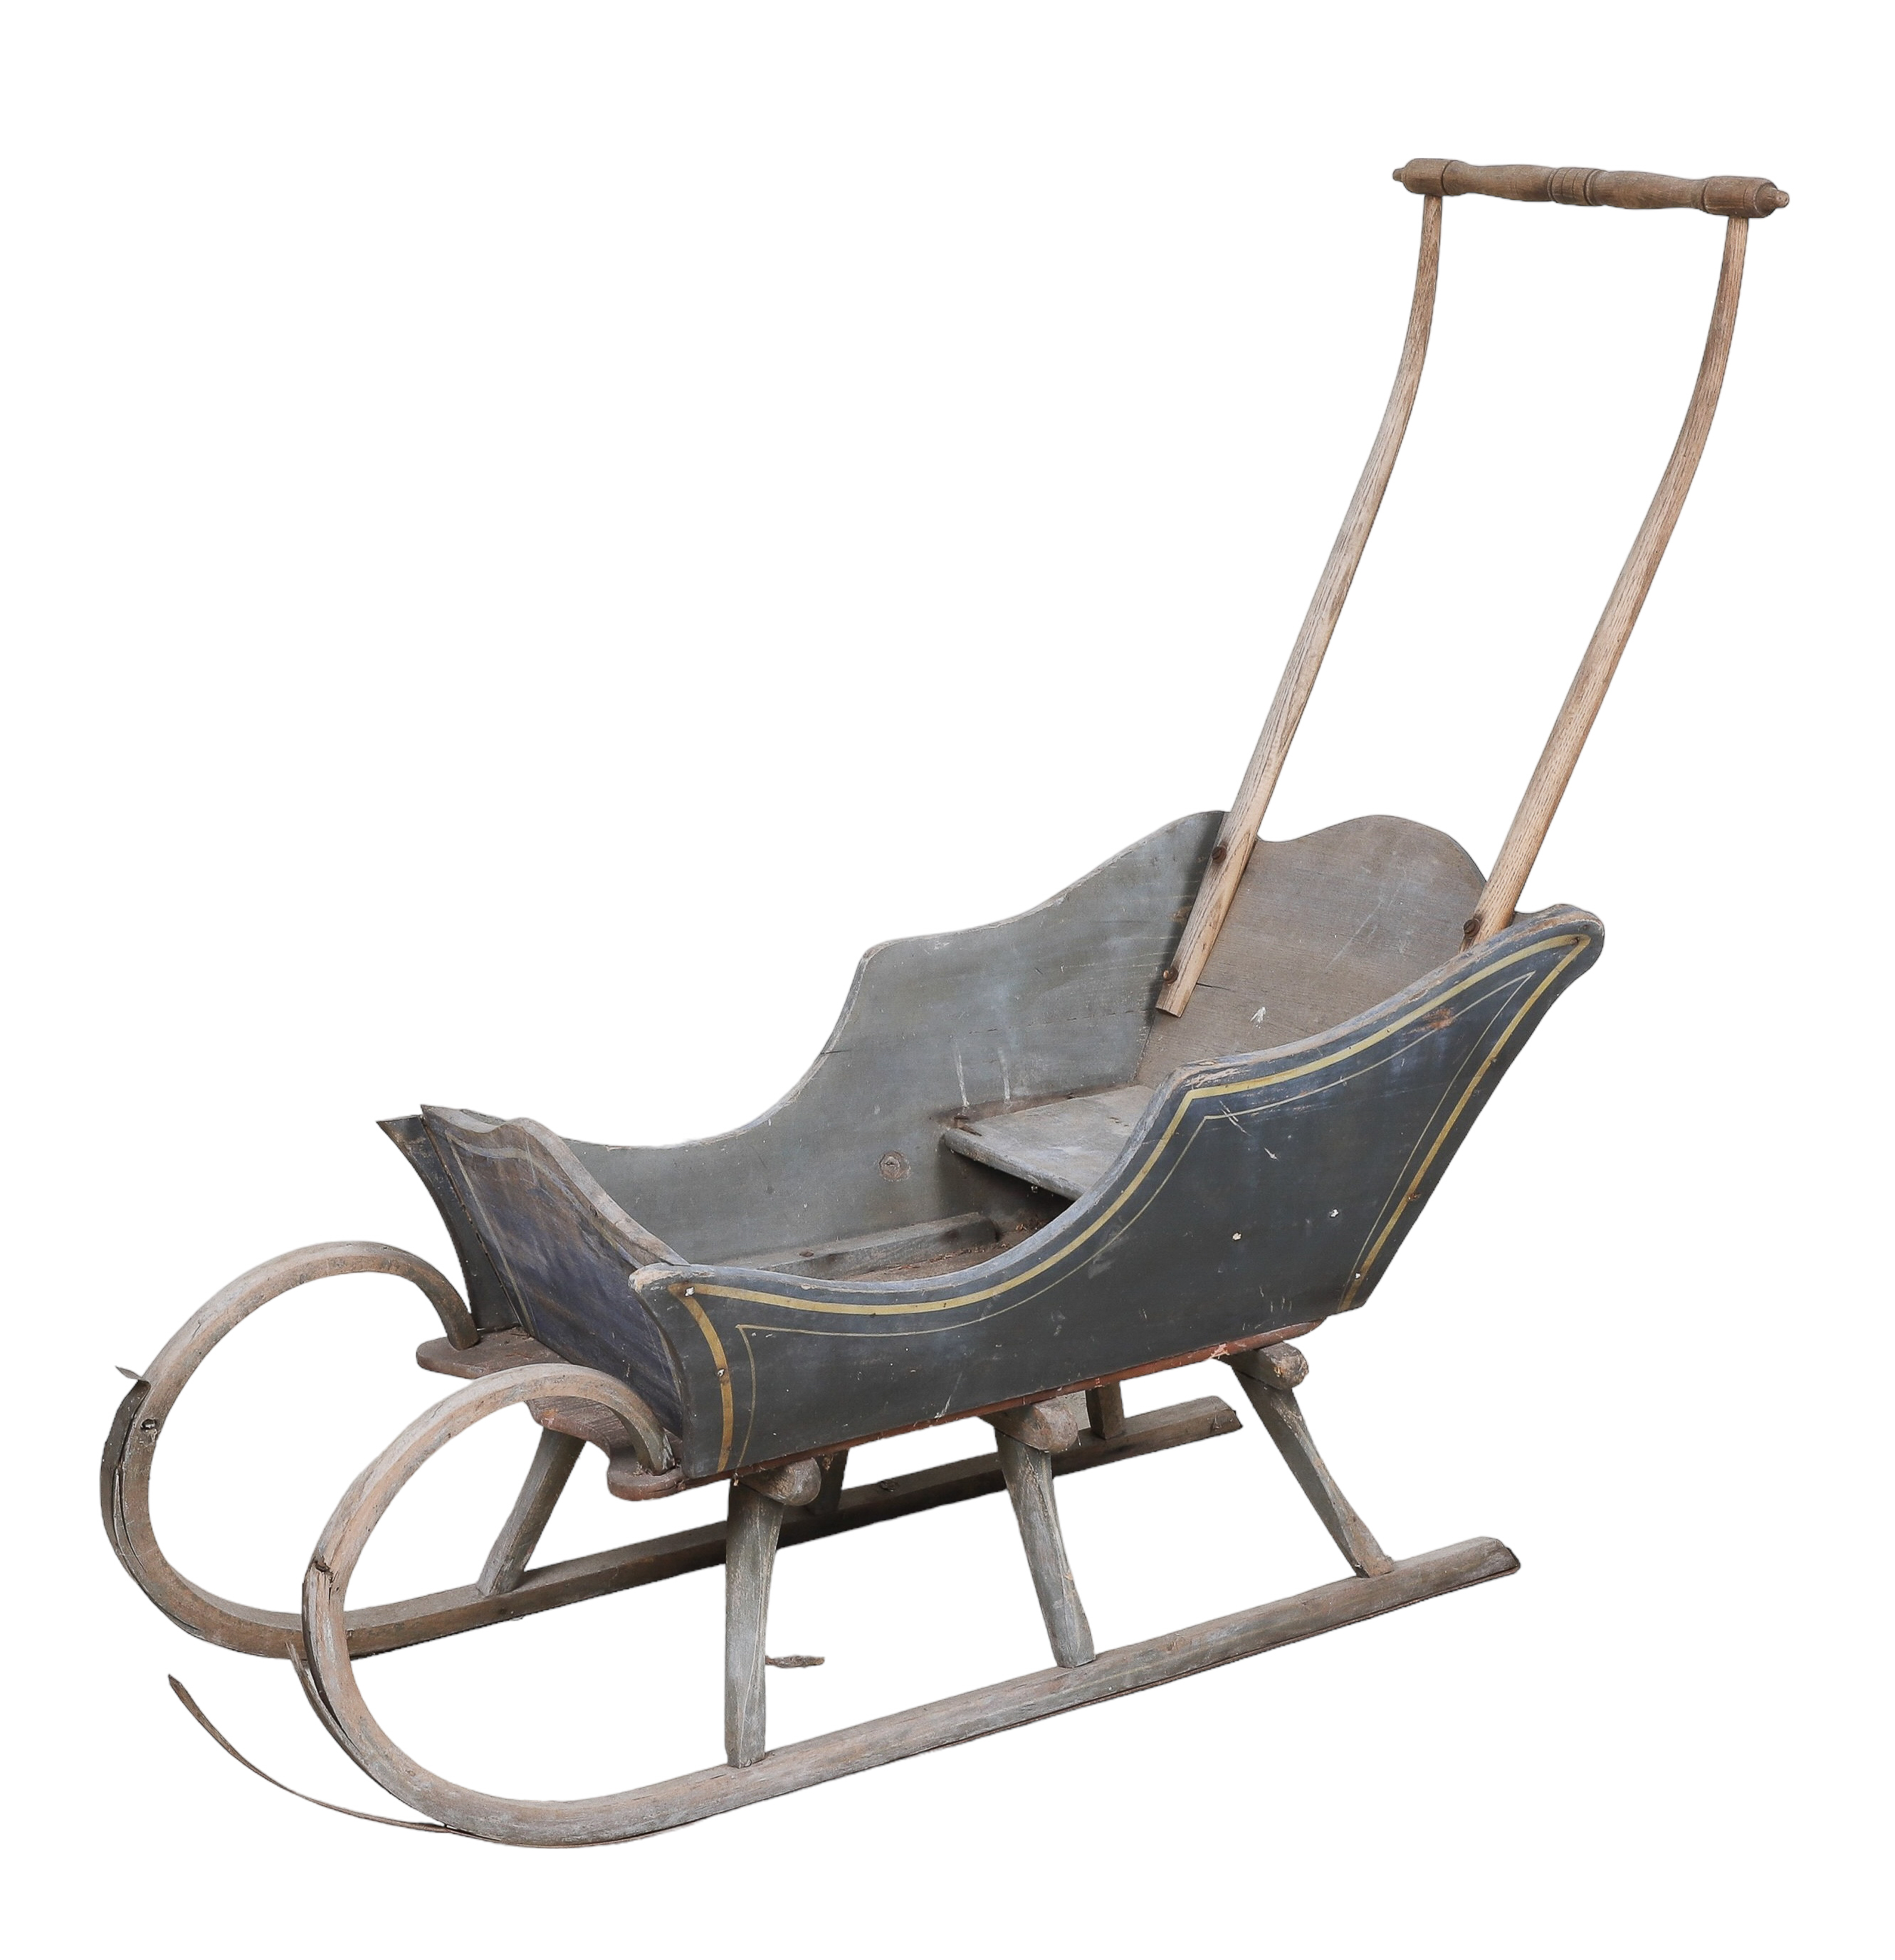 Childs push sleigh in old blue paint,